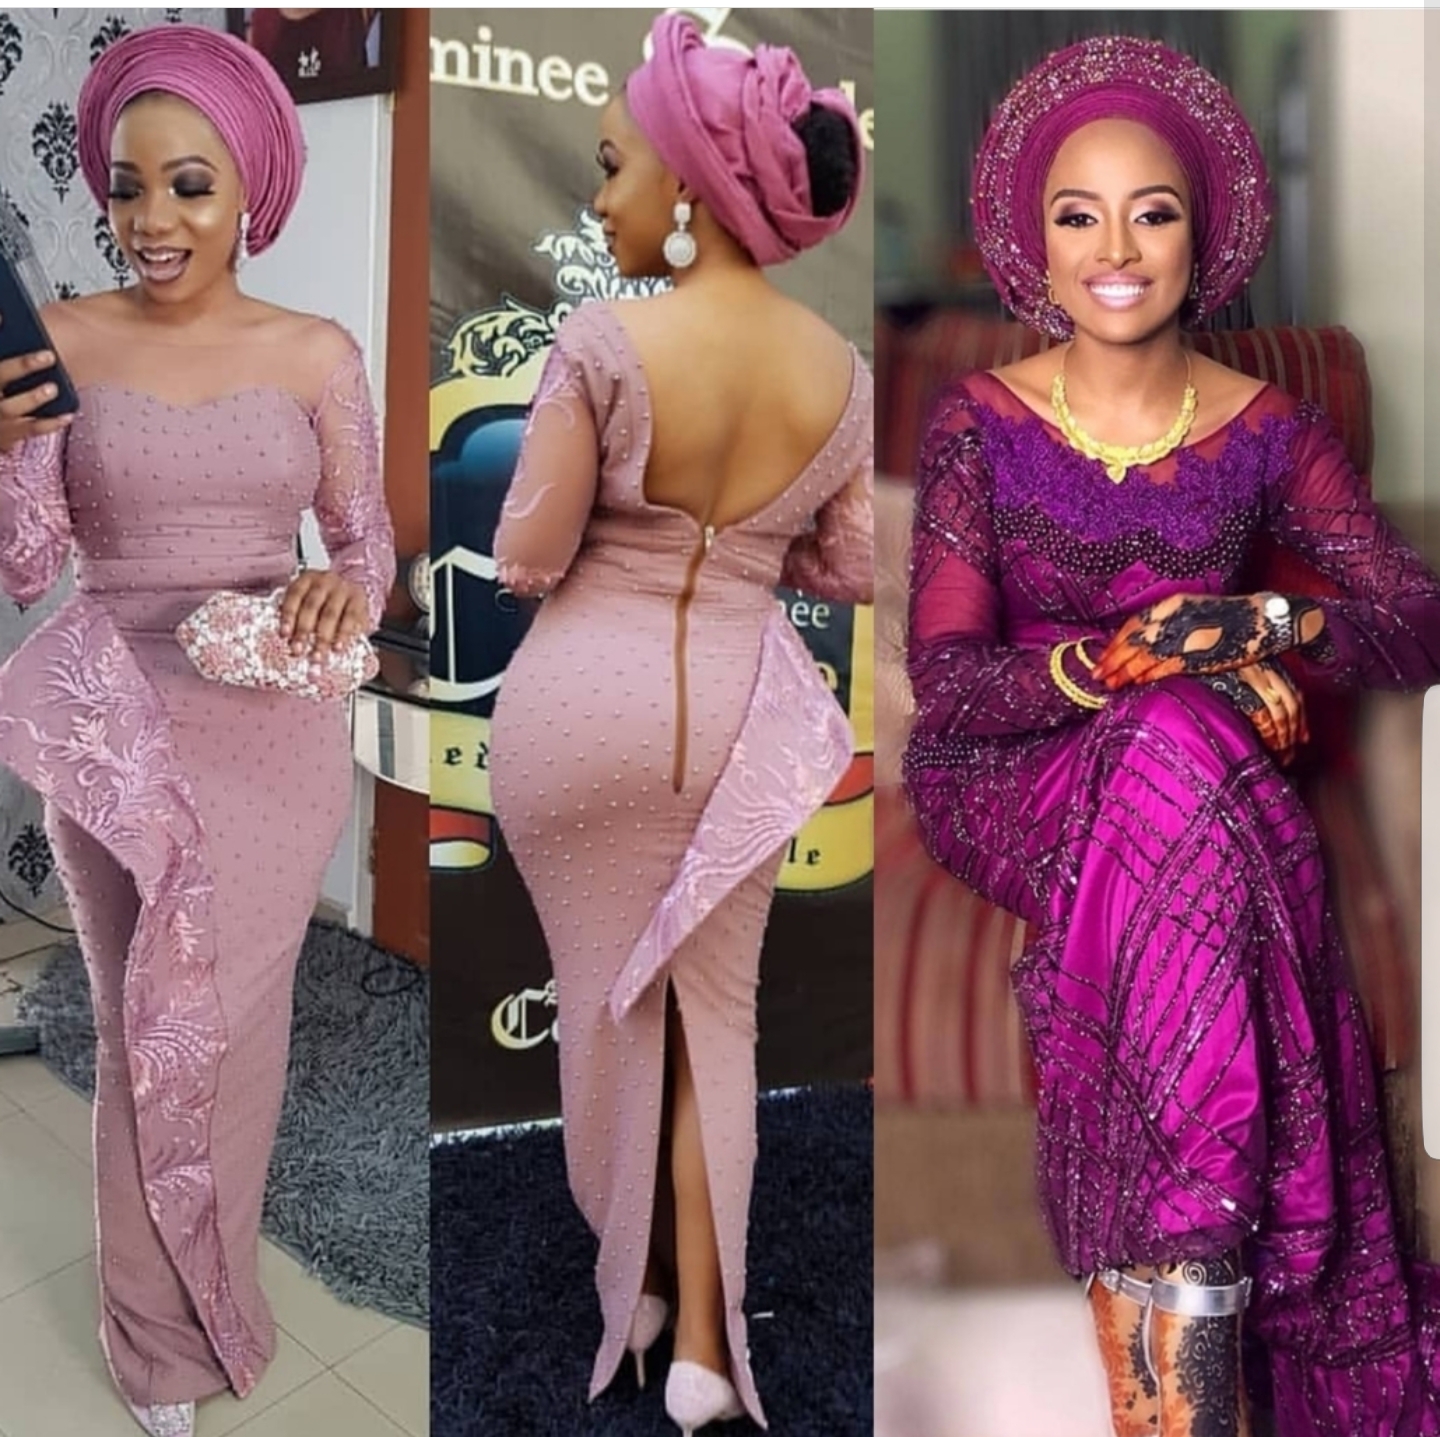 Onion color matching Gele and epele to match!  #classybabesrock#stunning#fabrics | By Classy babes rockFacebook